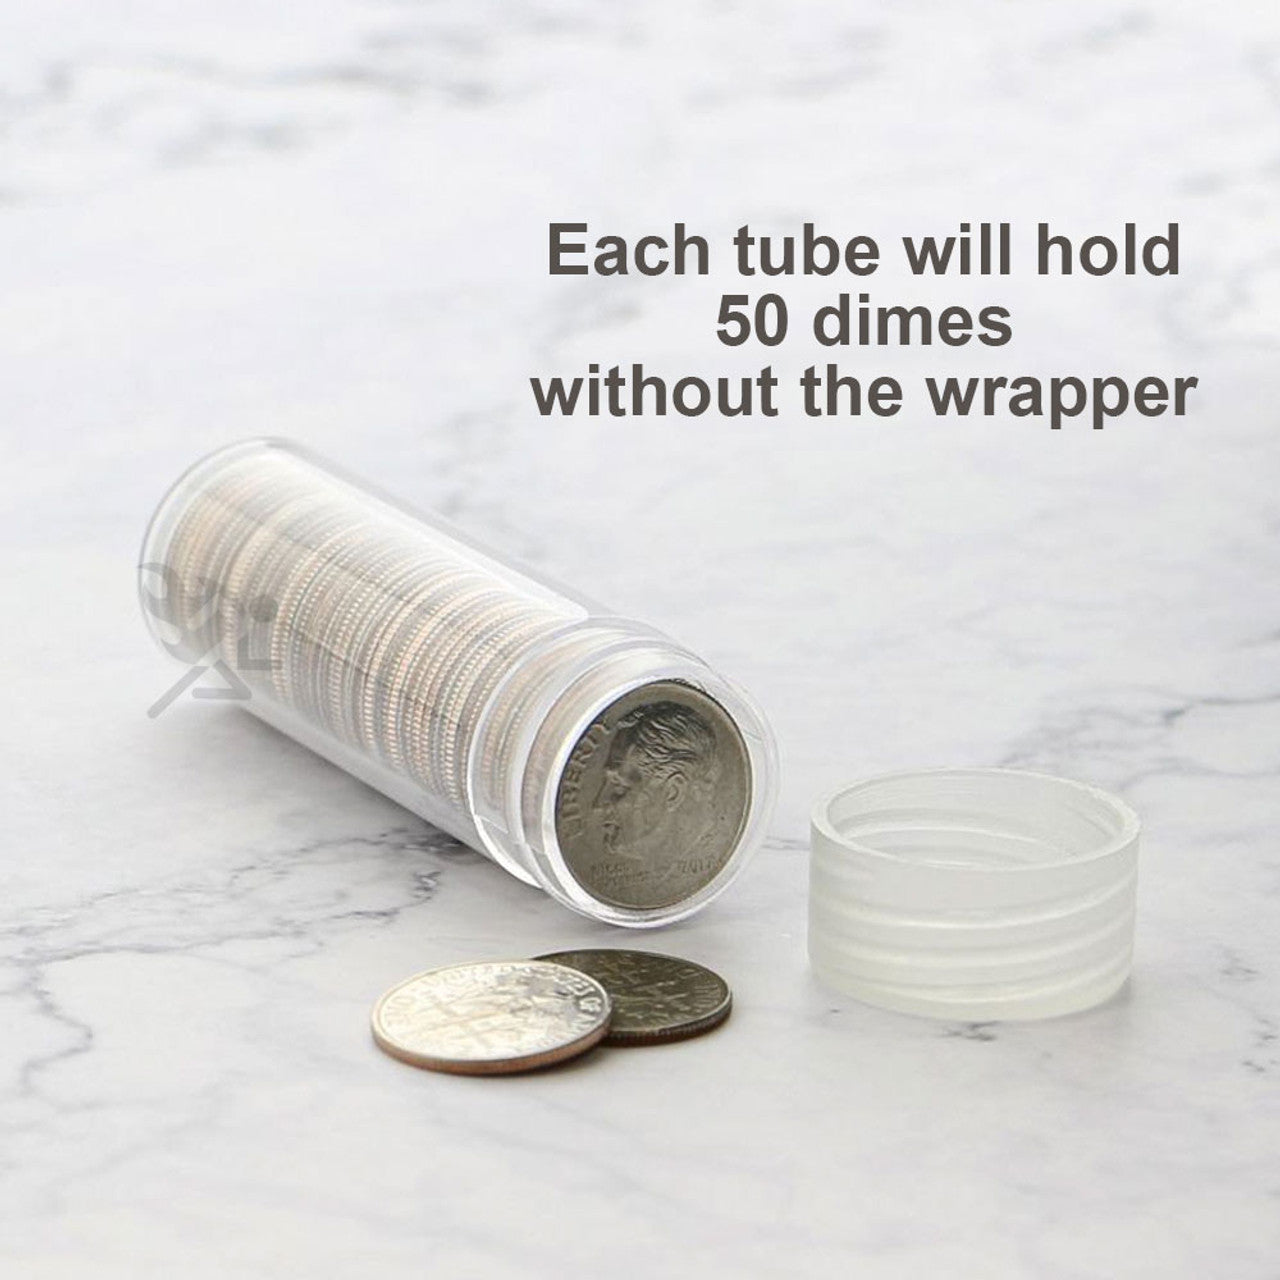 Round Coin Storage Tubes for Dimes